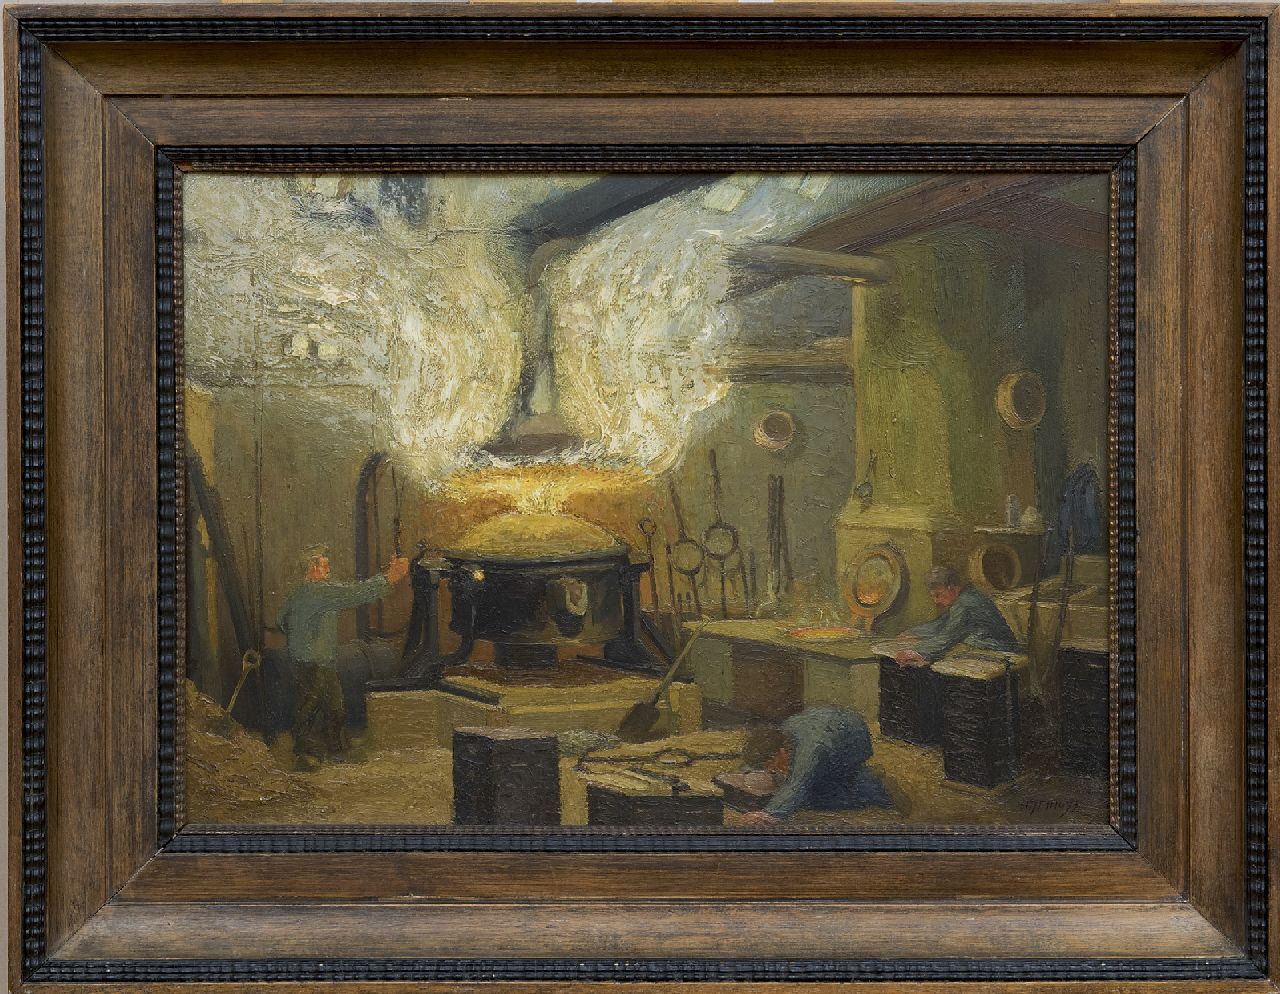 Eshuijs H.J.  | Hendrikus Jacobus Eshuijs | Paintings offered for sale | An iron foundry, oil on panel 40.0 x 56.0 cm, signed l.r.